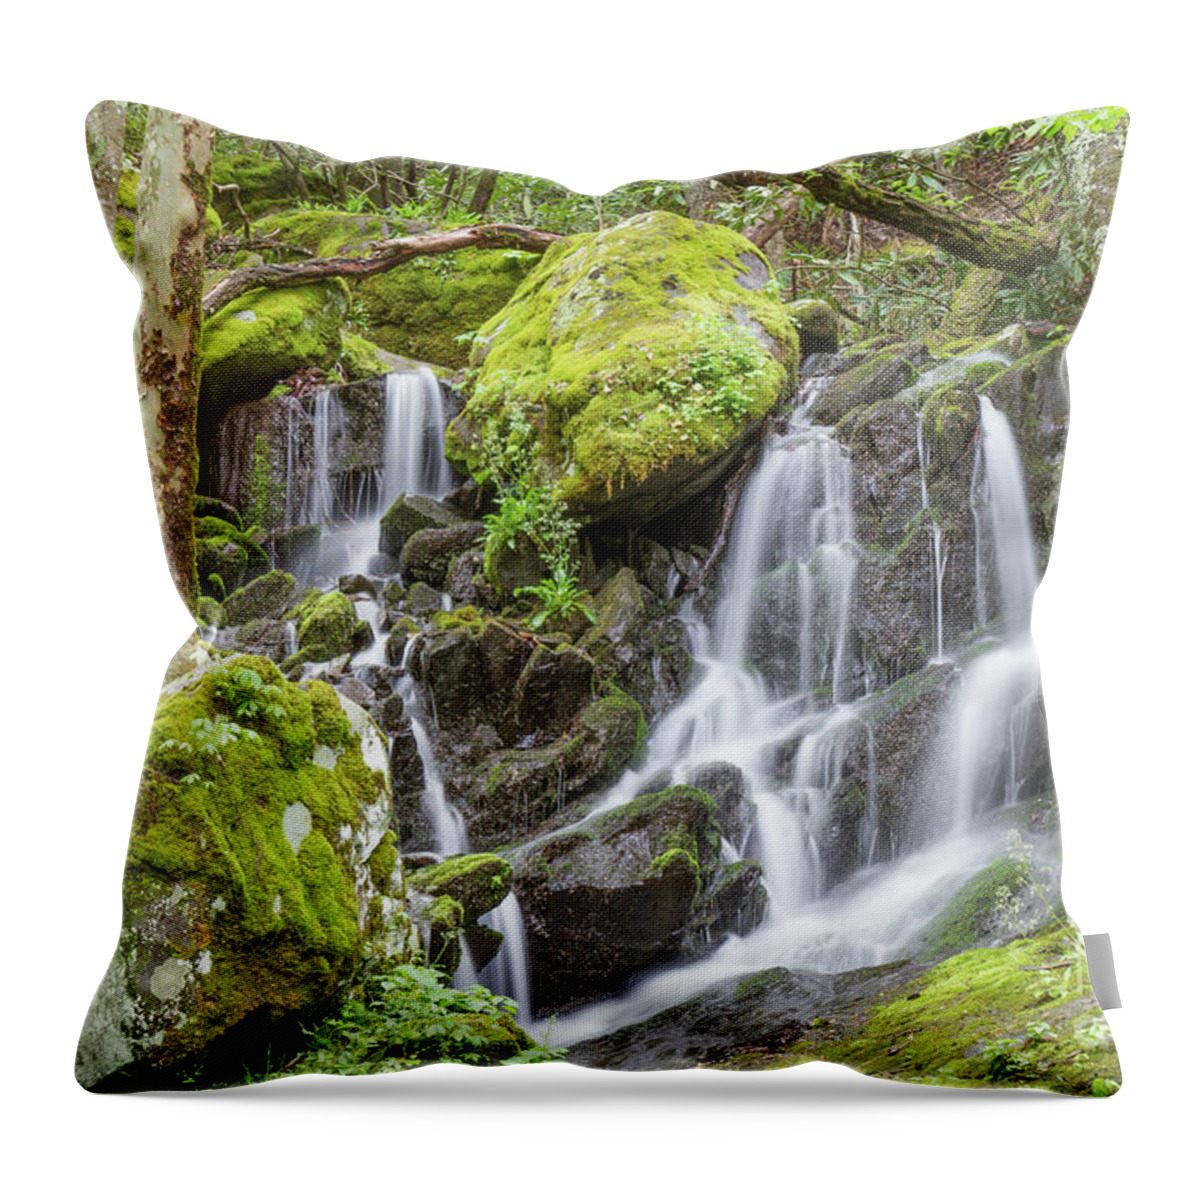 Serenity Station Throw Pillow featuring the photograph Serenity Station by Chris Scroggins